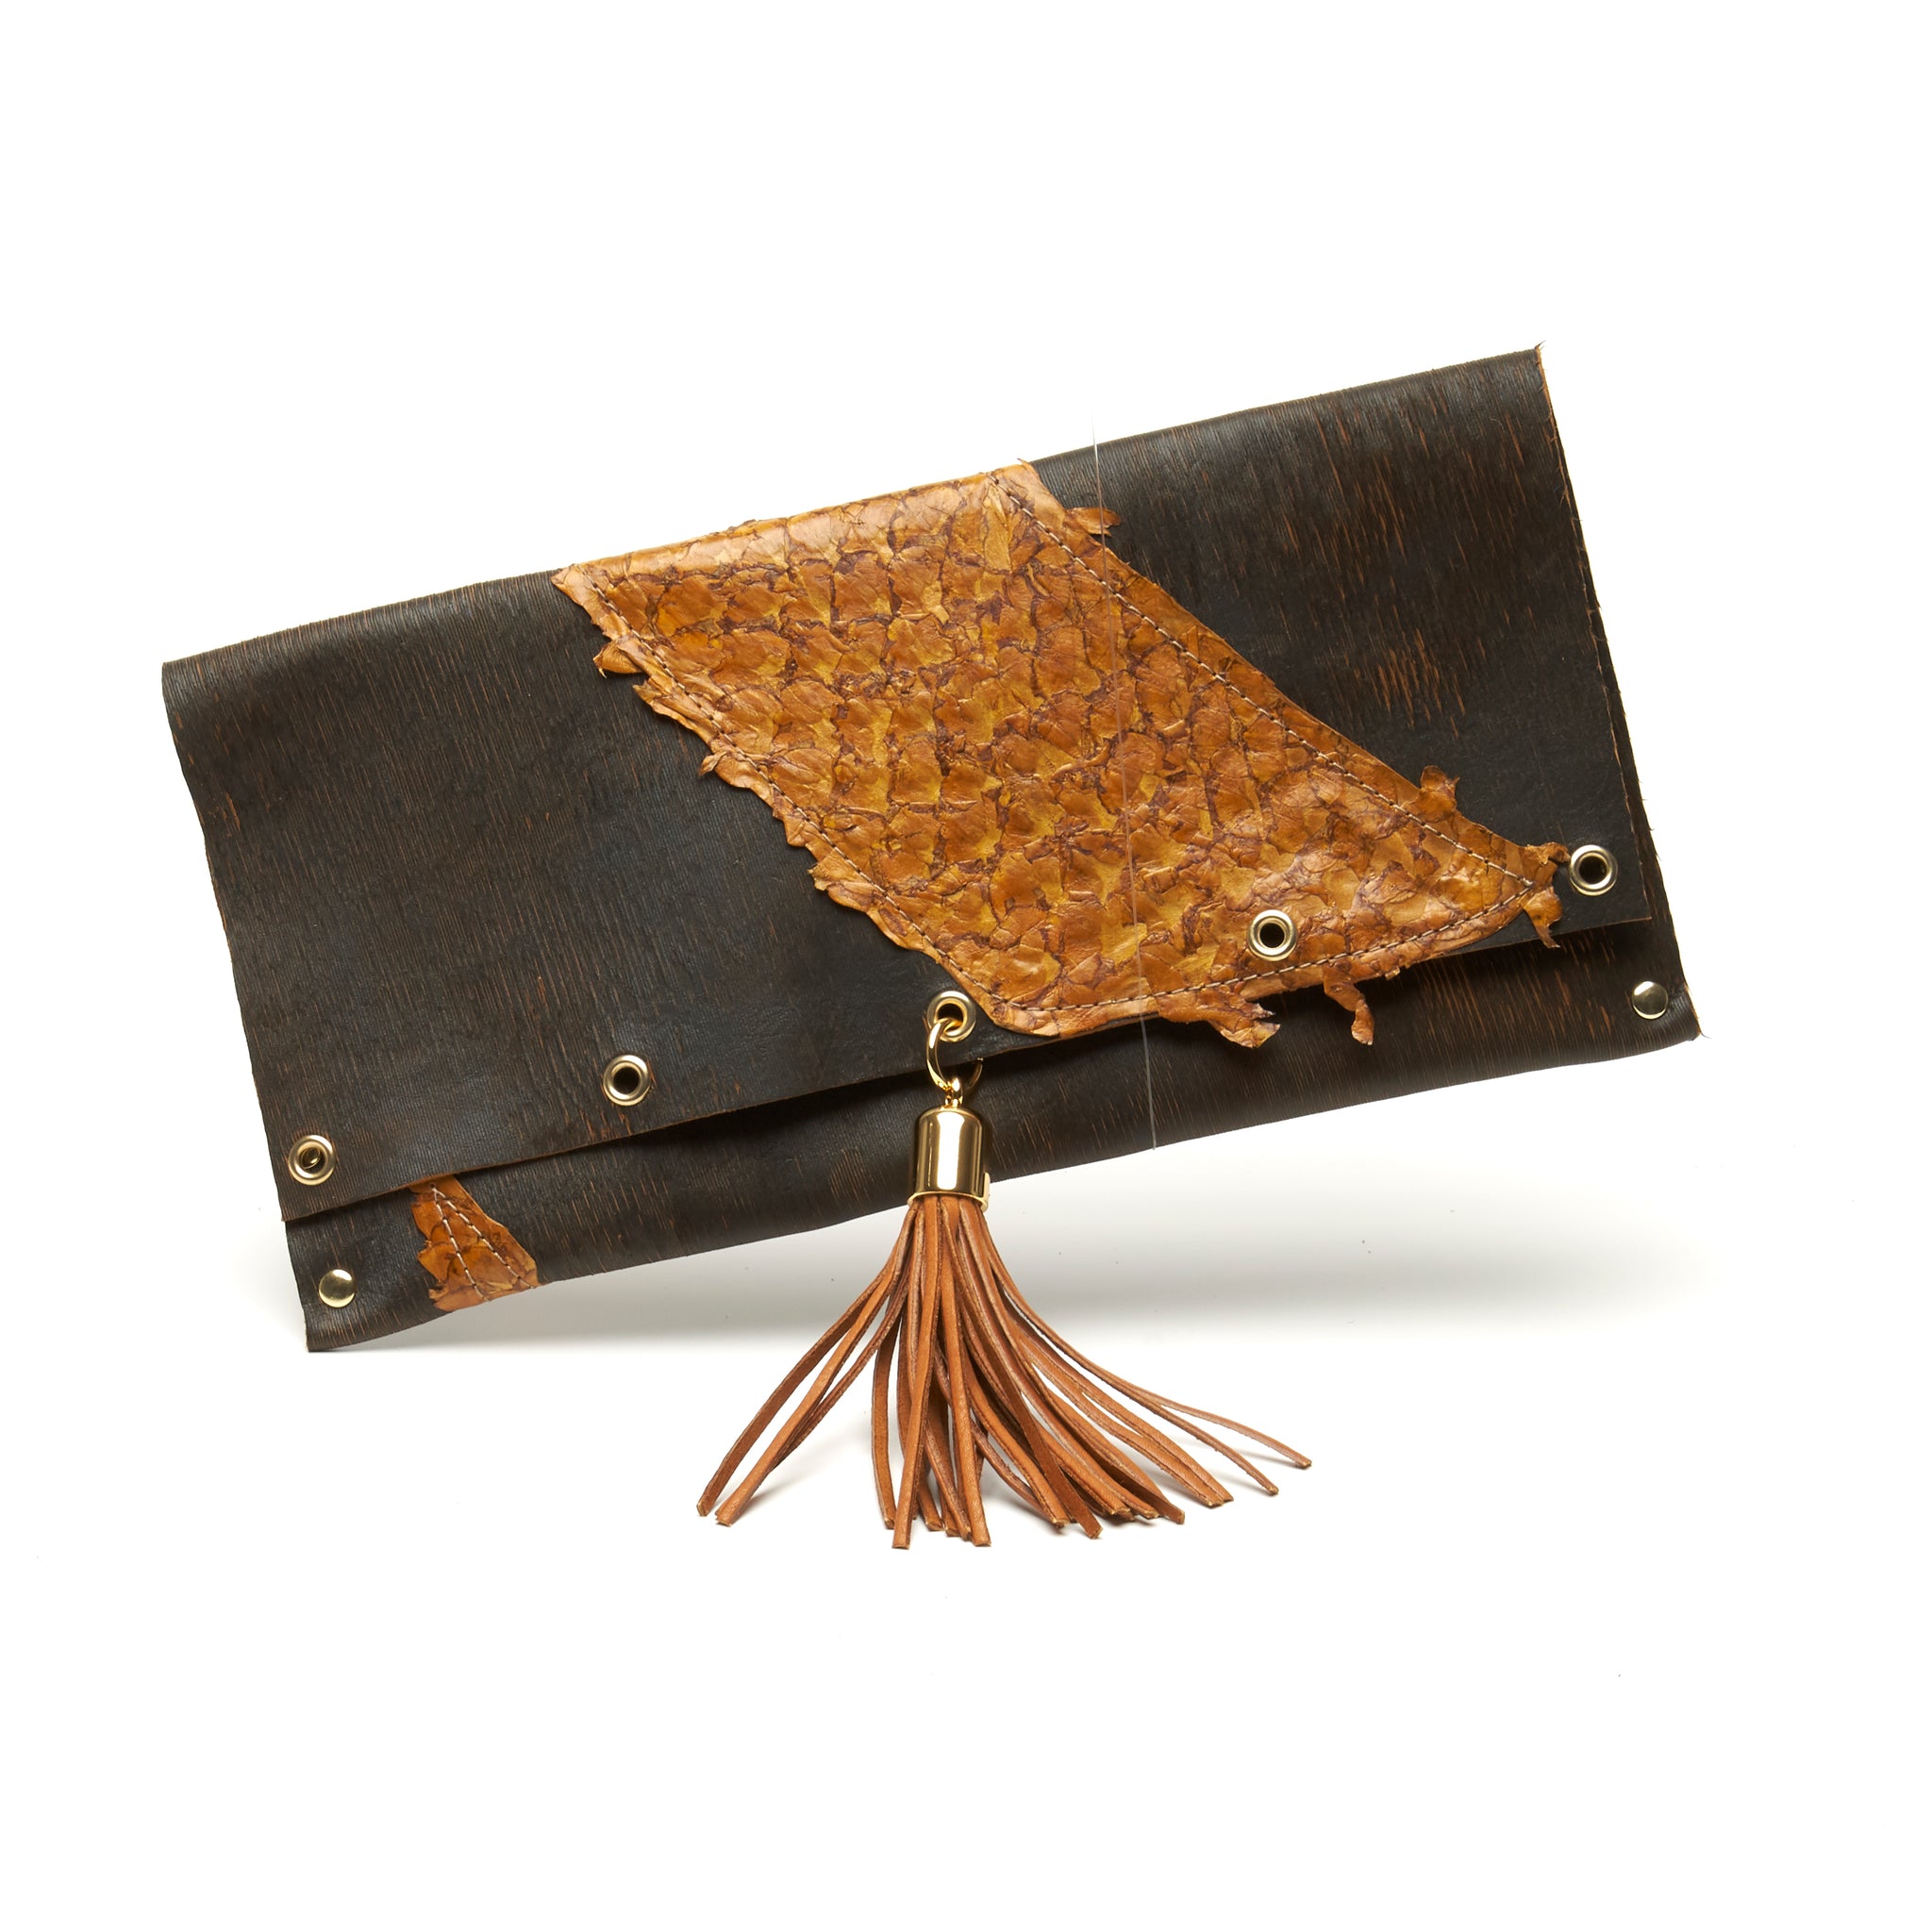 LASER CUT COWHIDE AND FISH LEATHER CLUTCH WITH DEERSKIN TASSEL AND MAGNETIC CLOSURE. by NYET Jewelry